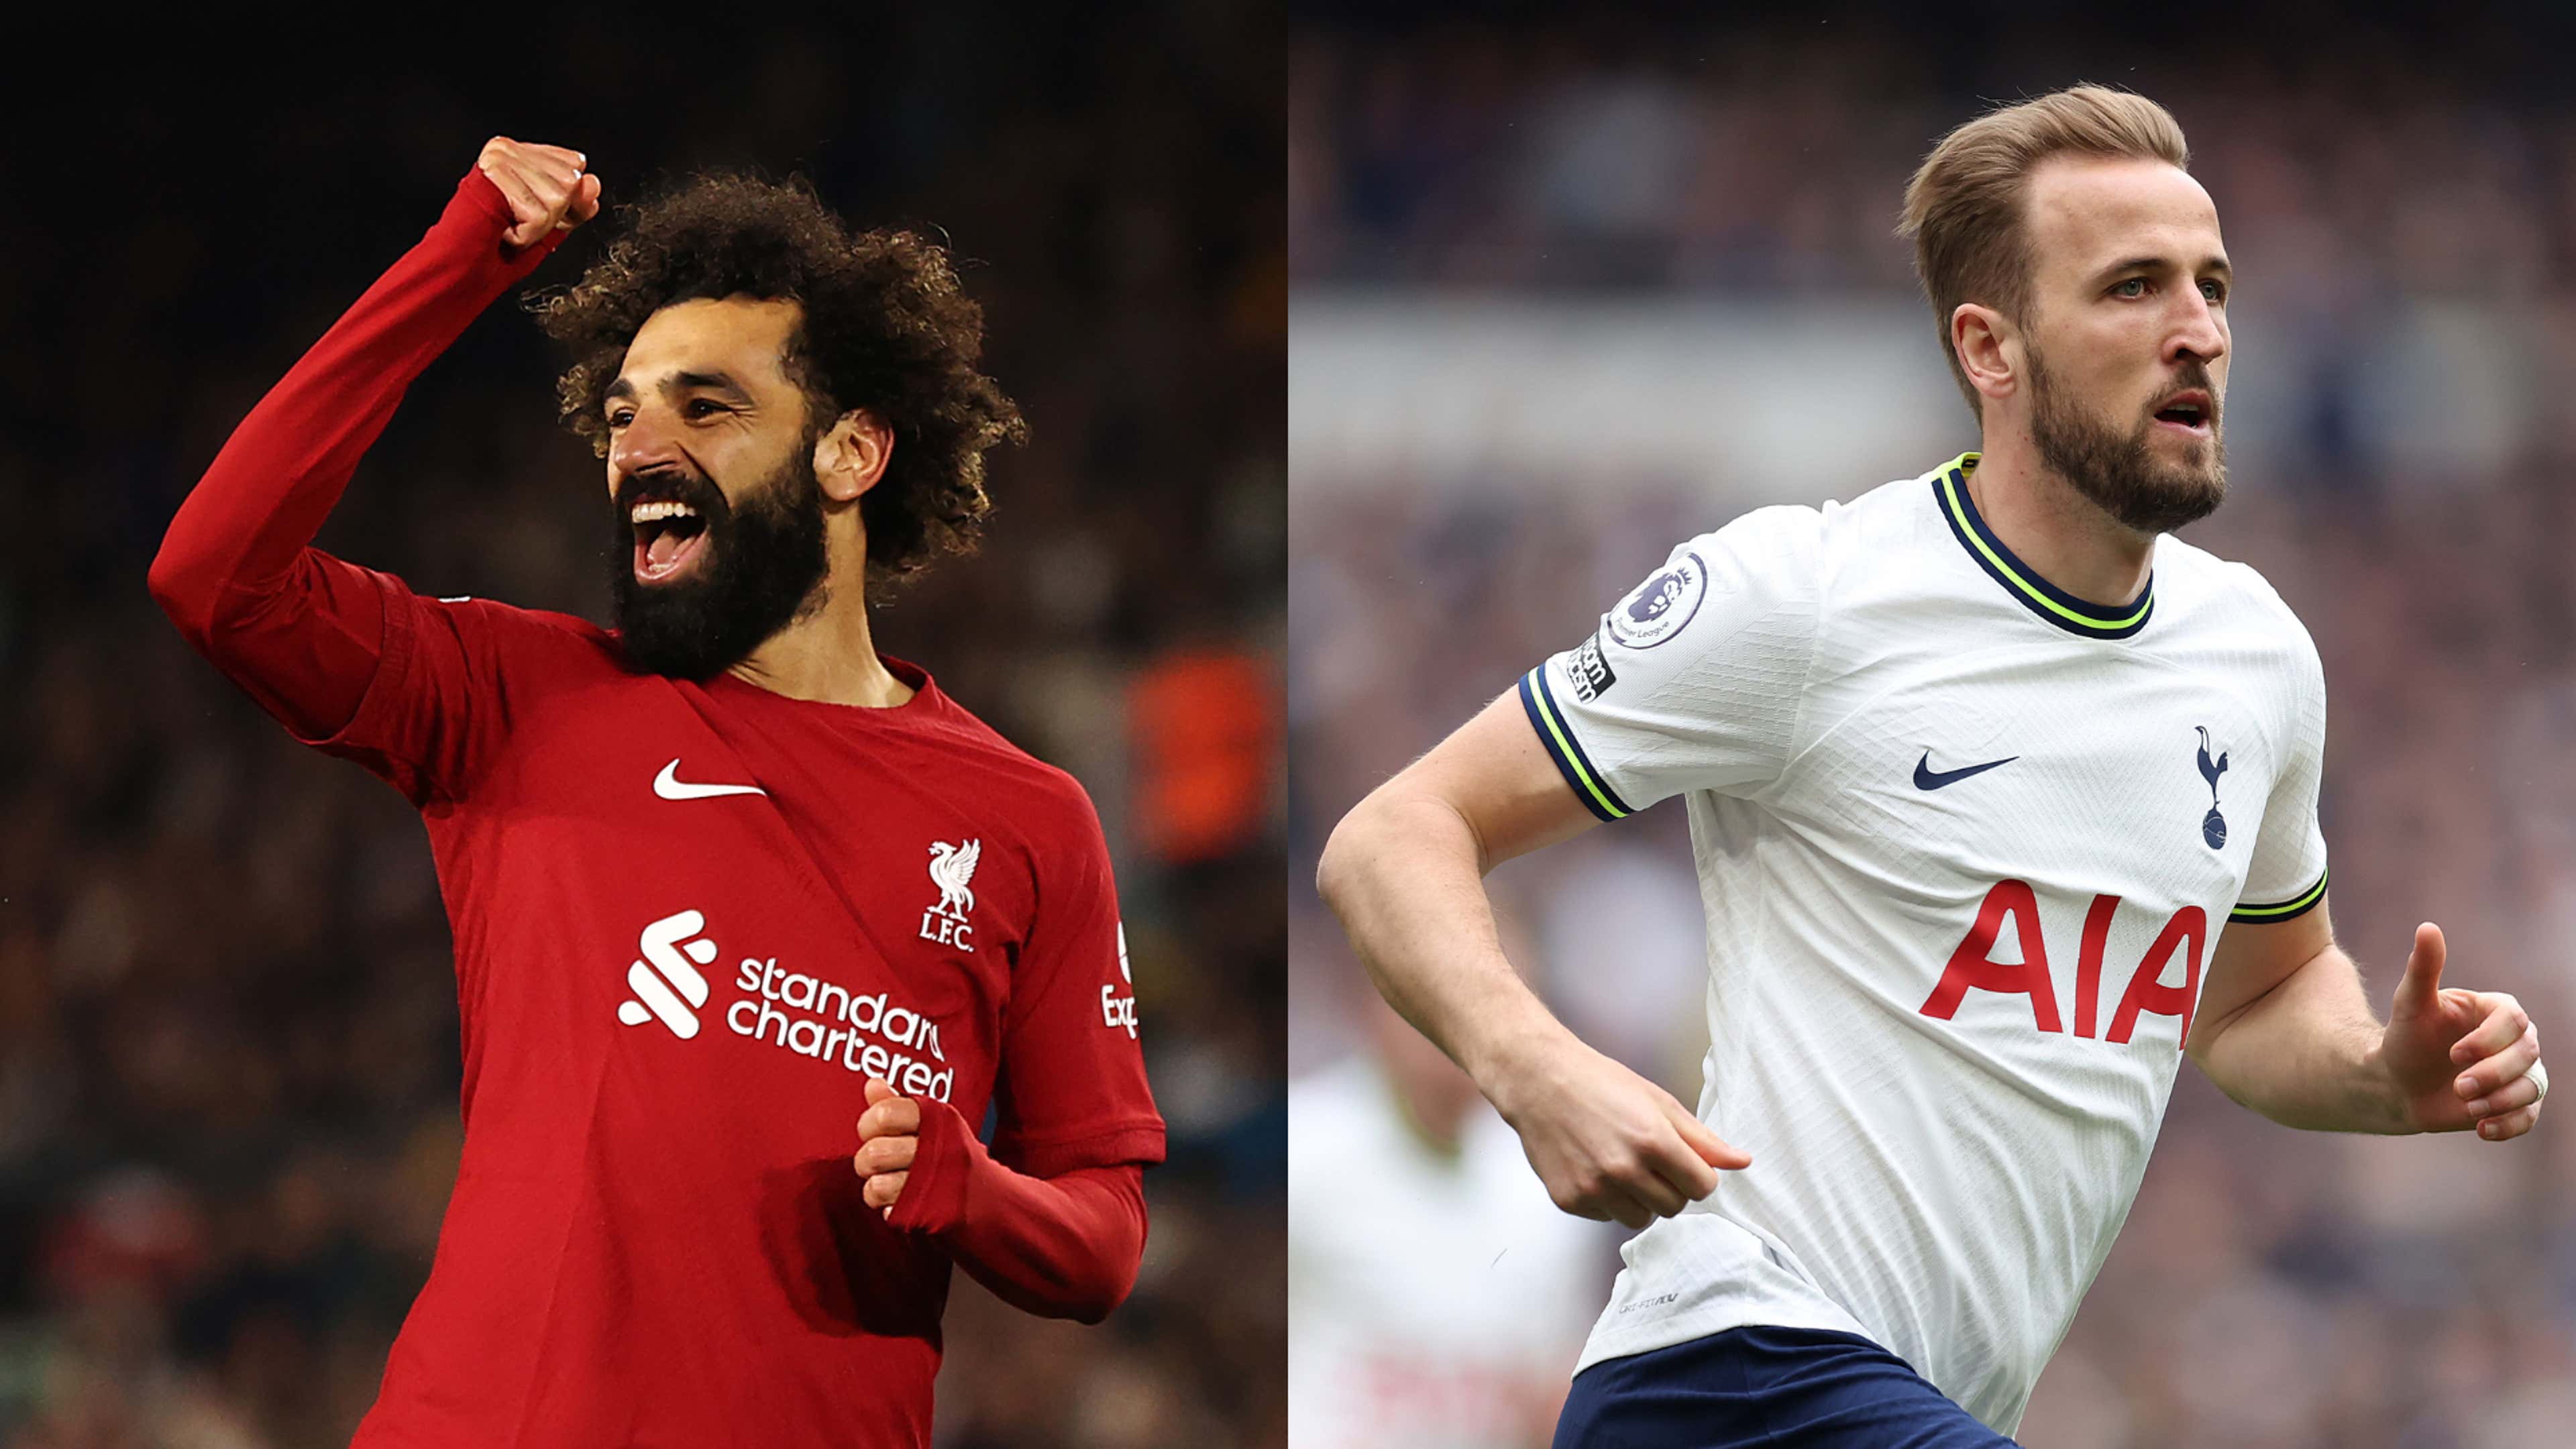 Liverpool players rated vs Tottenham Hotspur- The 4th Official